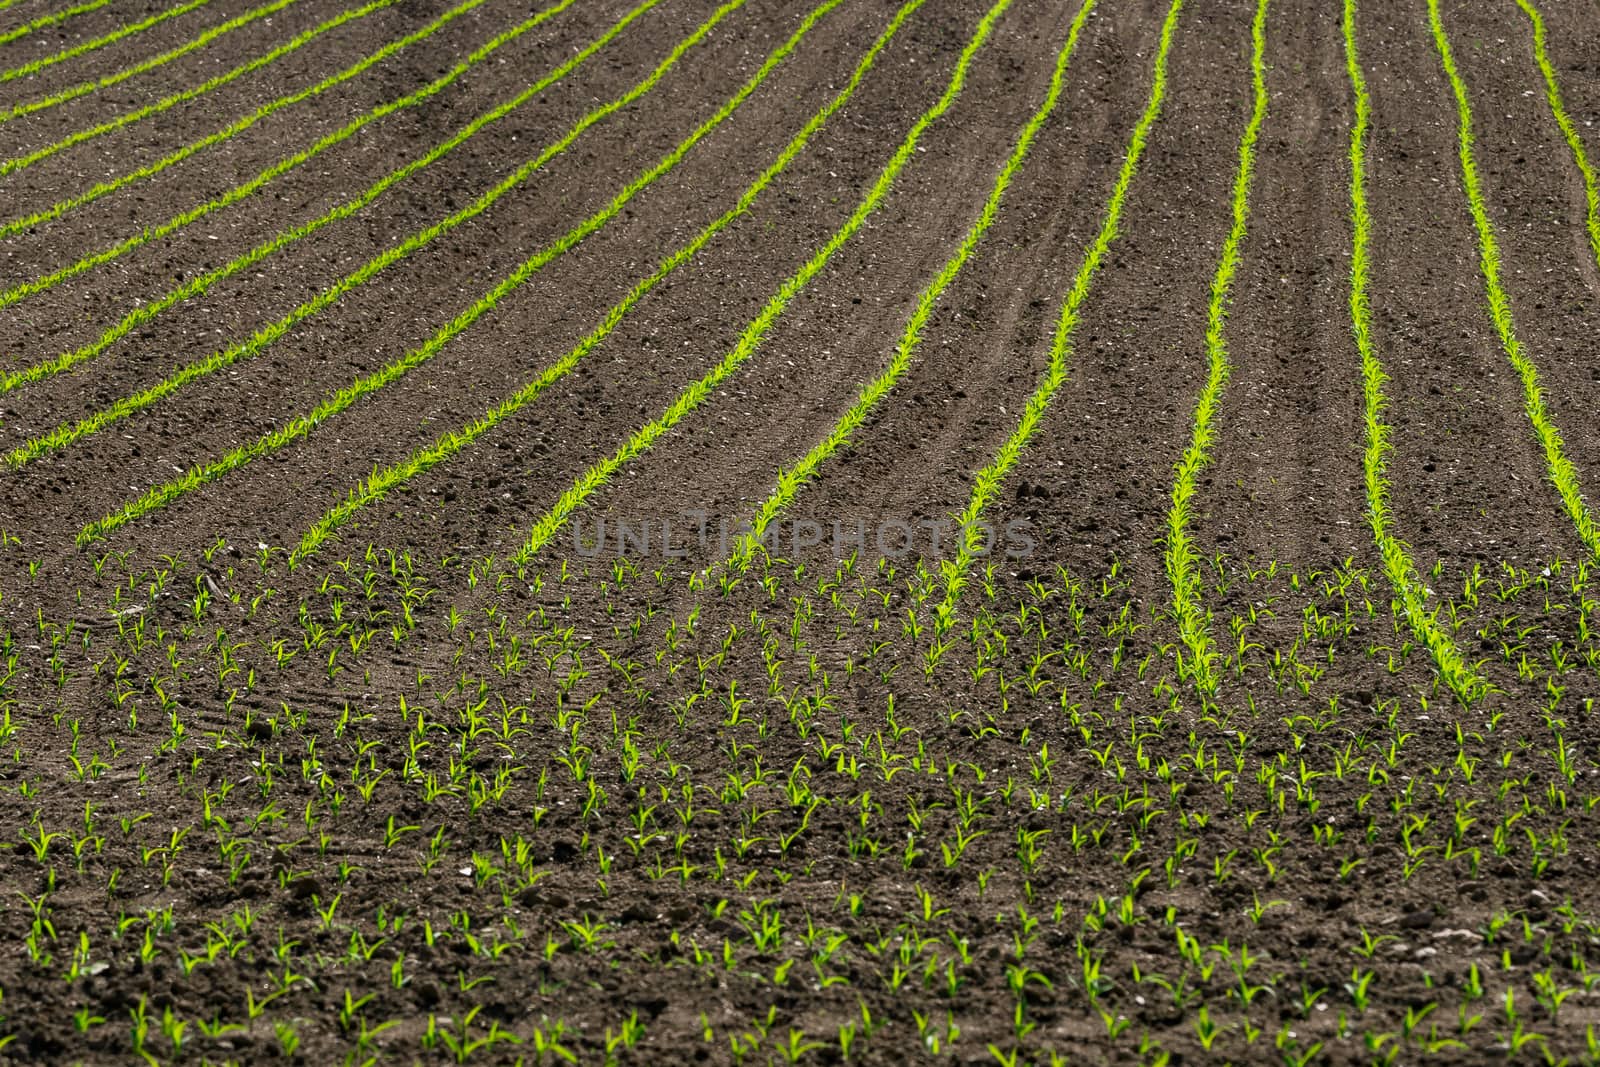 Rows of corn sprouts beginning to grow.
Corn seedlings growing i by xtrekx